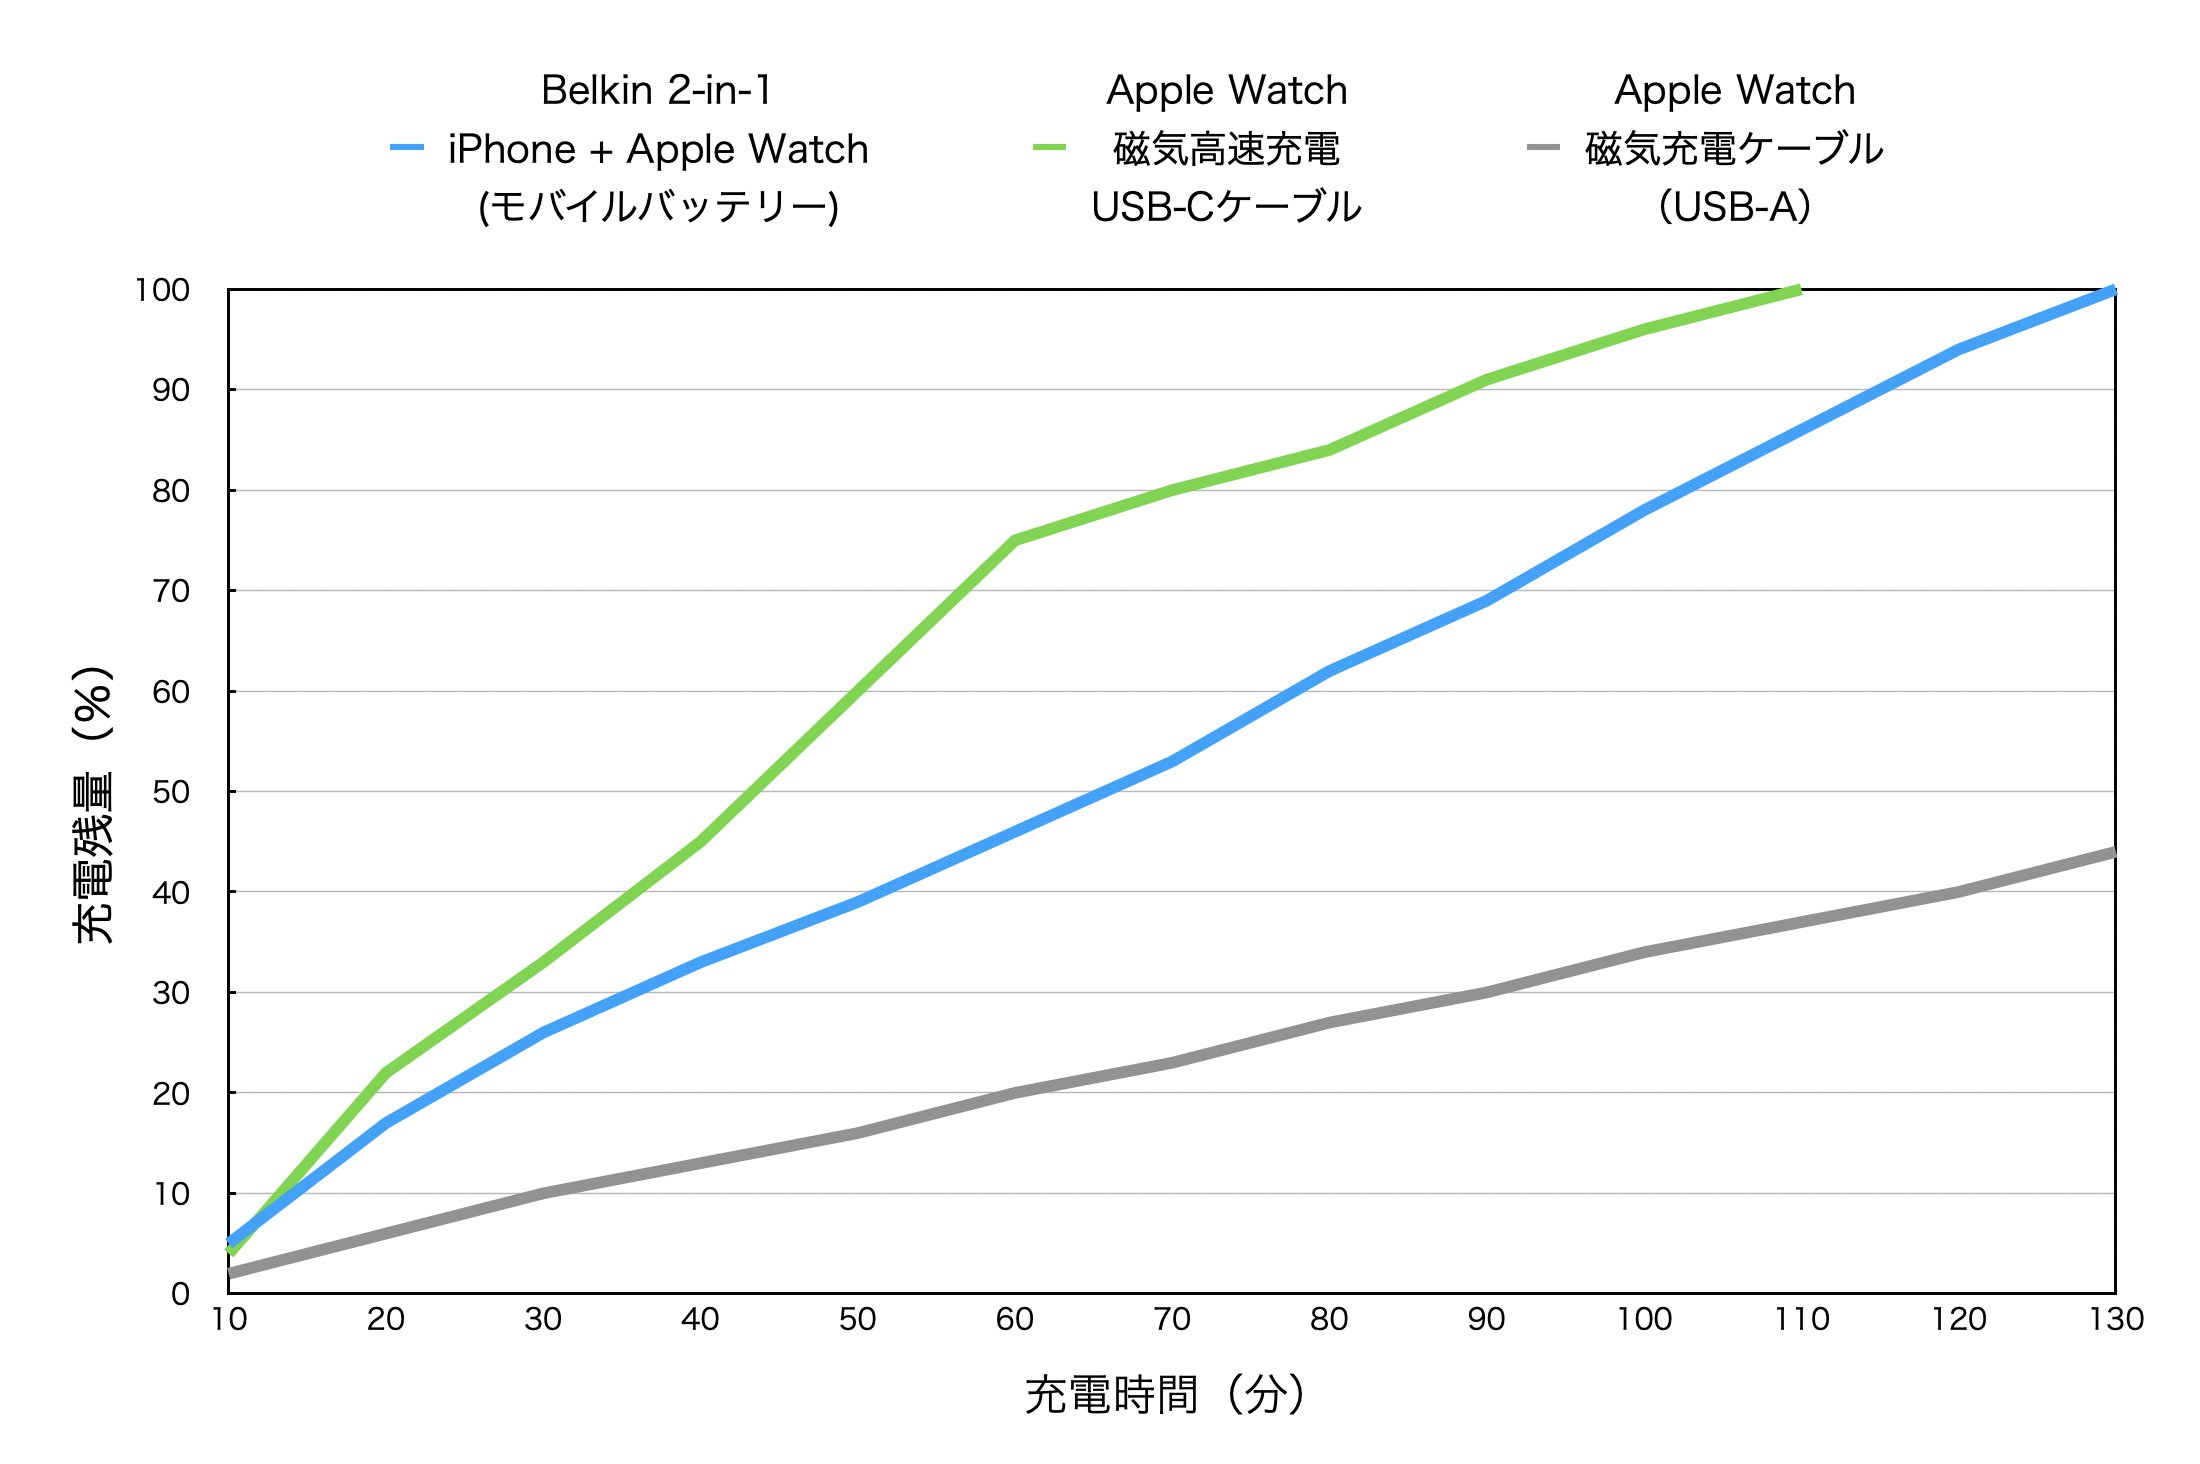 Belkin 2-in-1 iPhone + Apple Watch (モバイルバッテリー)の充電検証結果